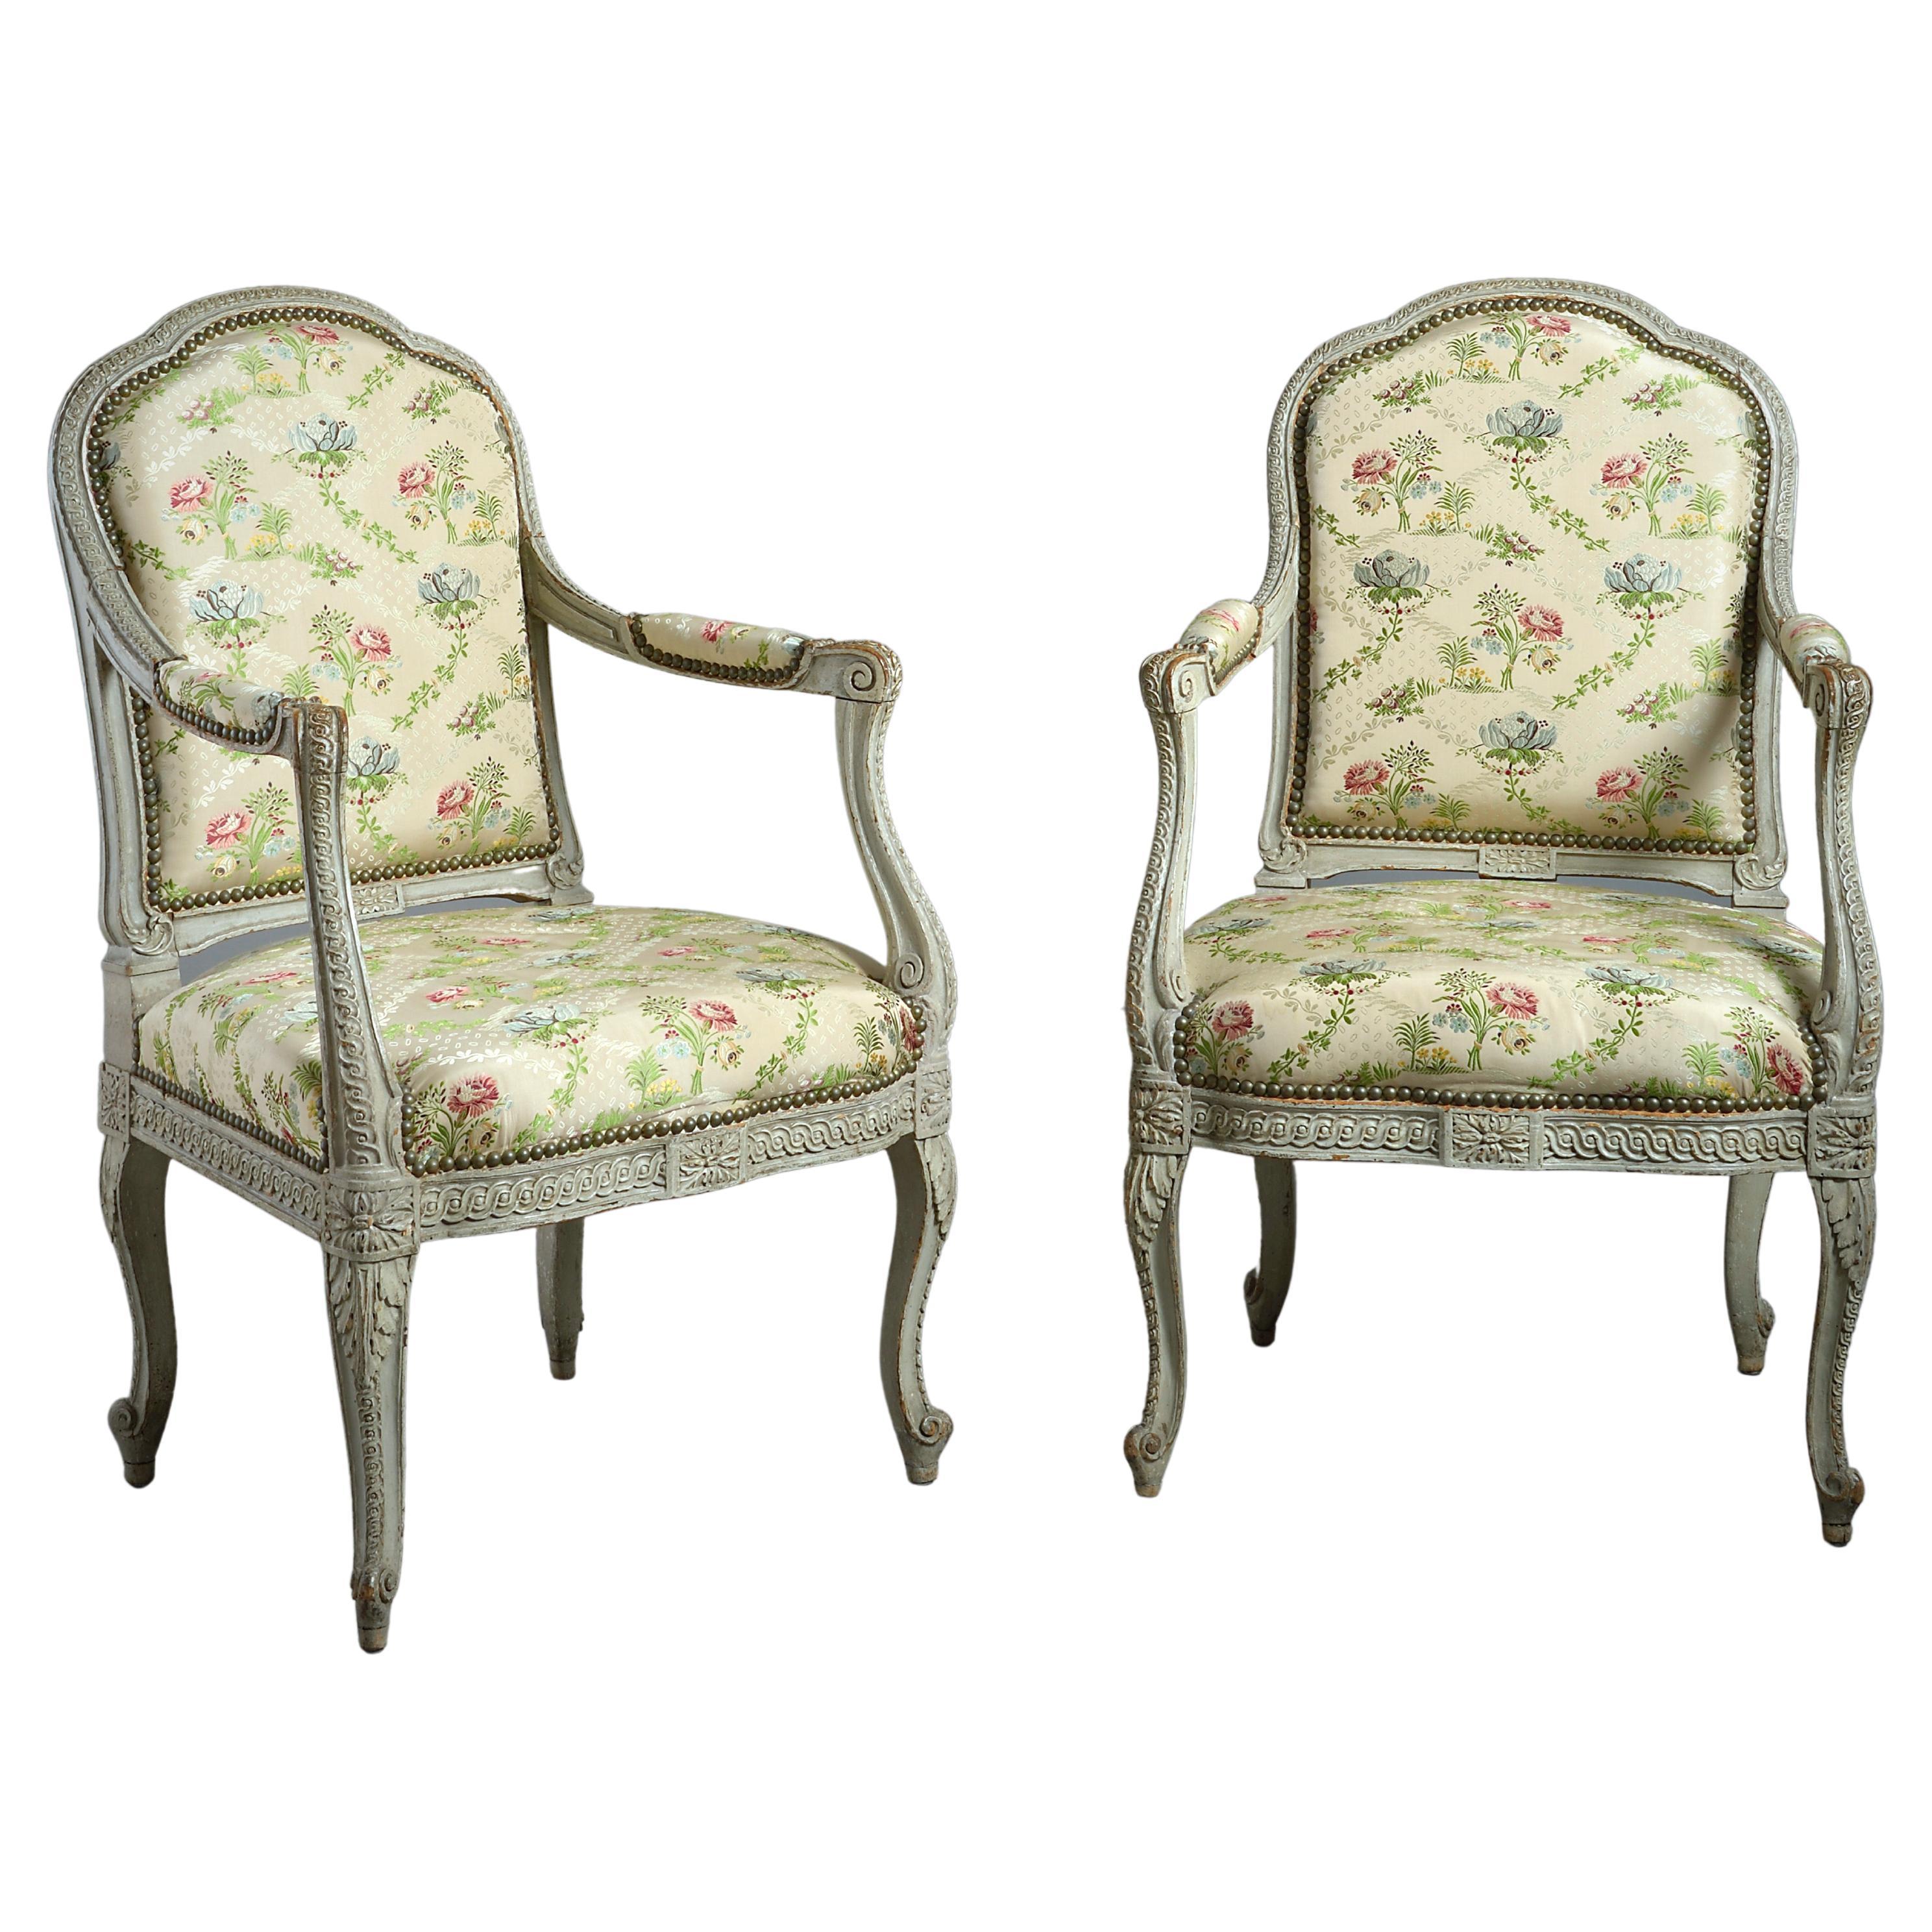 Set of Four Grey-Painted Fauteuils by Jean-Baptiste Gourdin For Sale